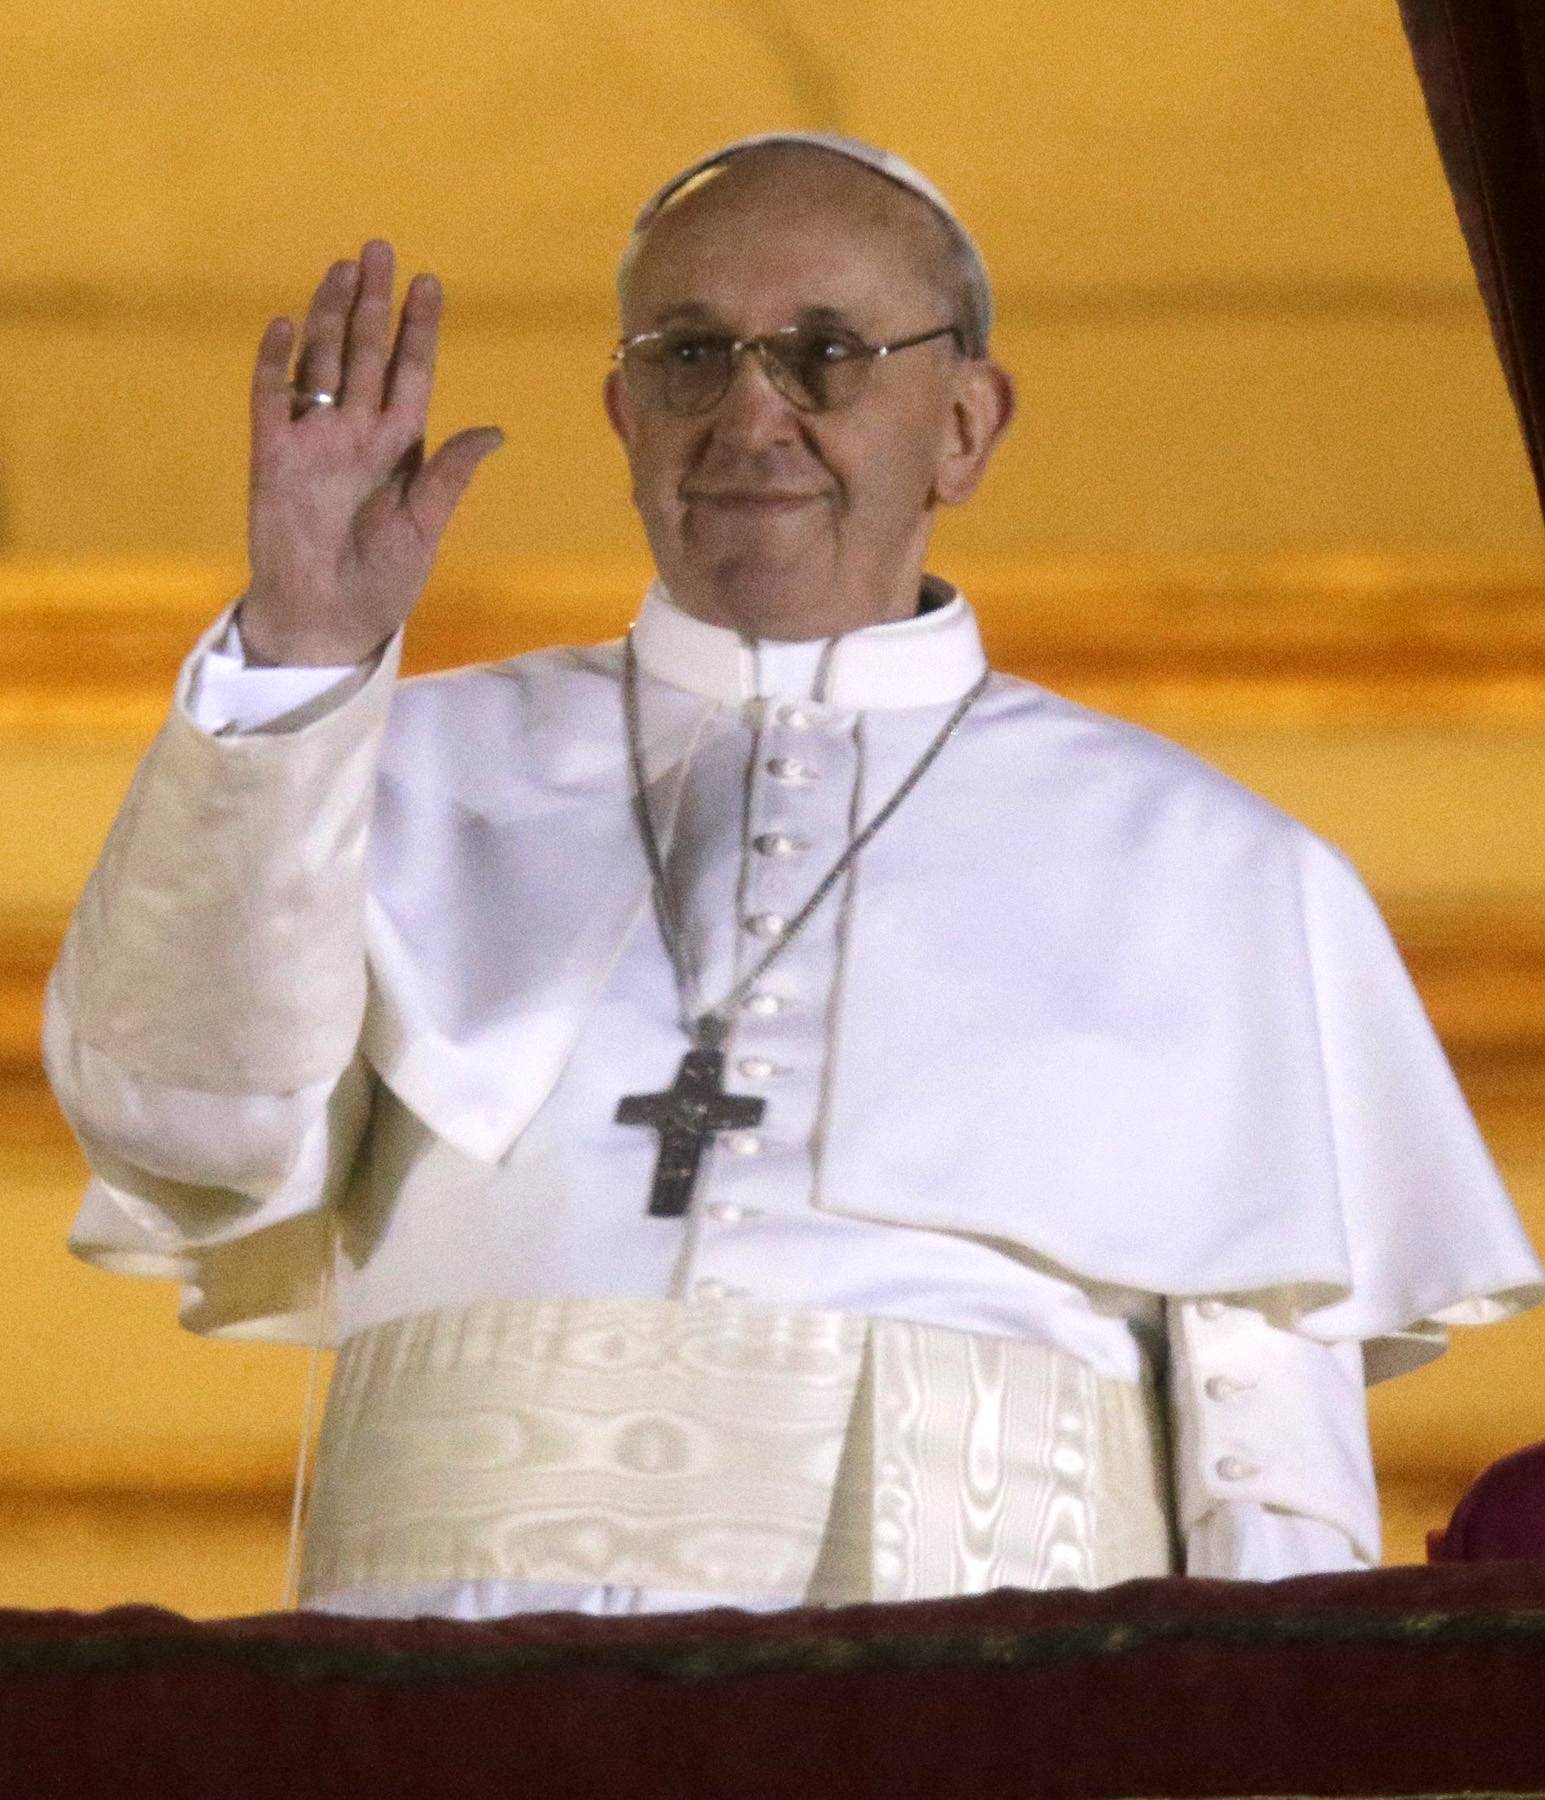 Pope Says He Won’t “Judge” Gay People